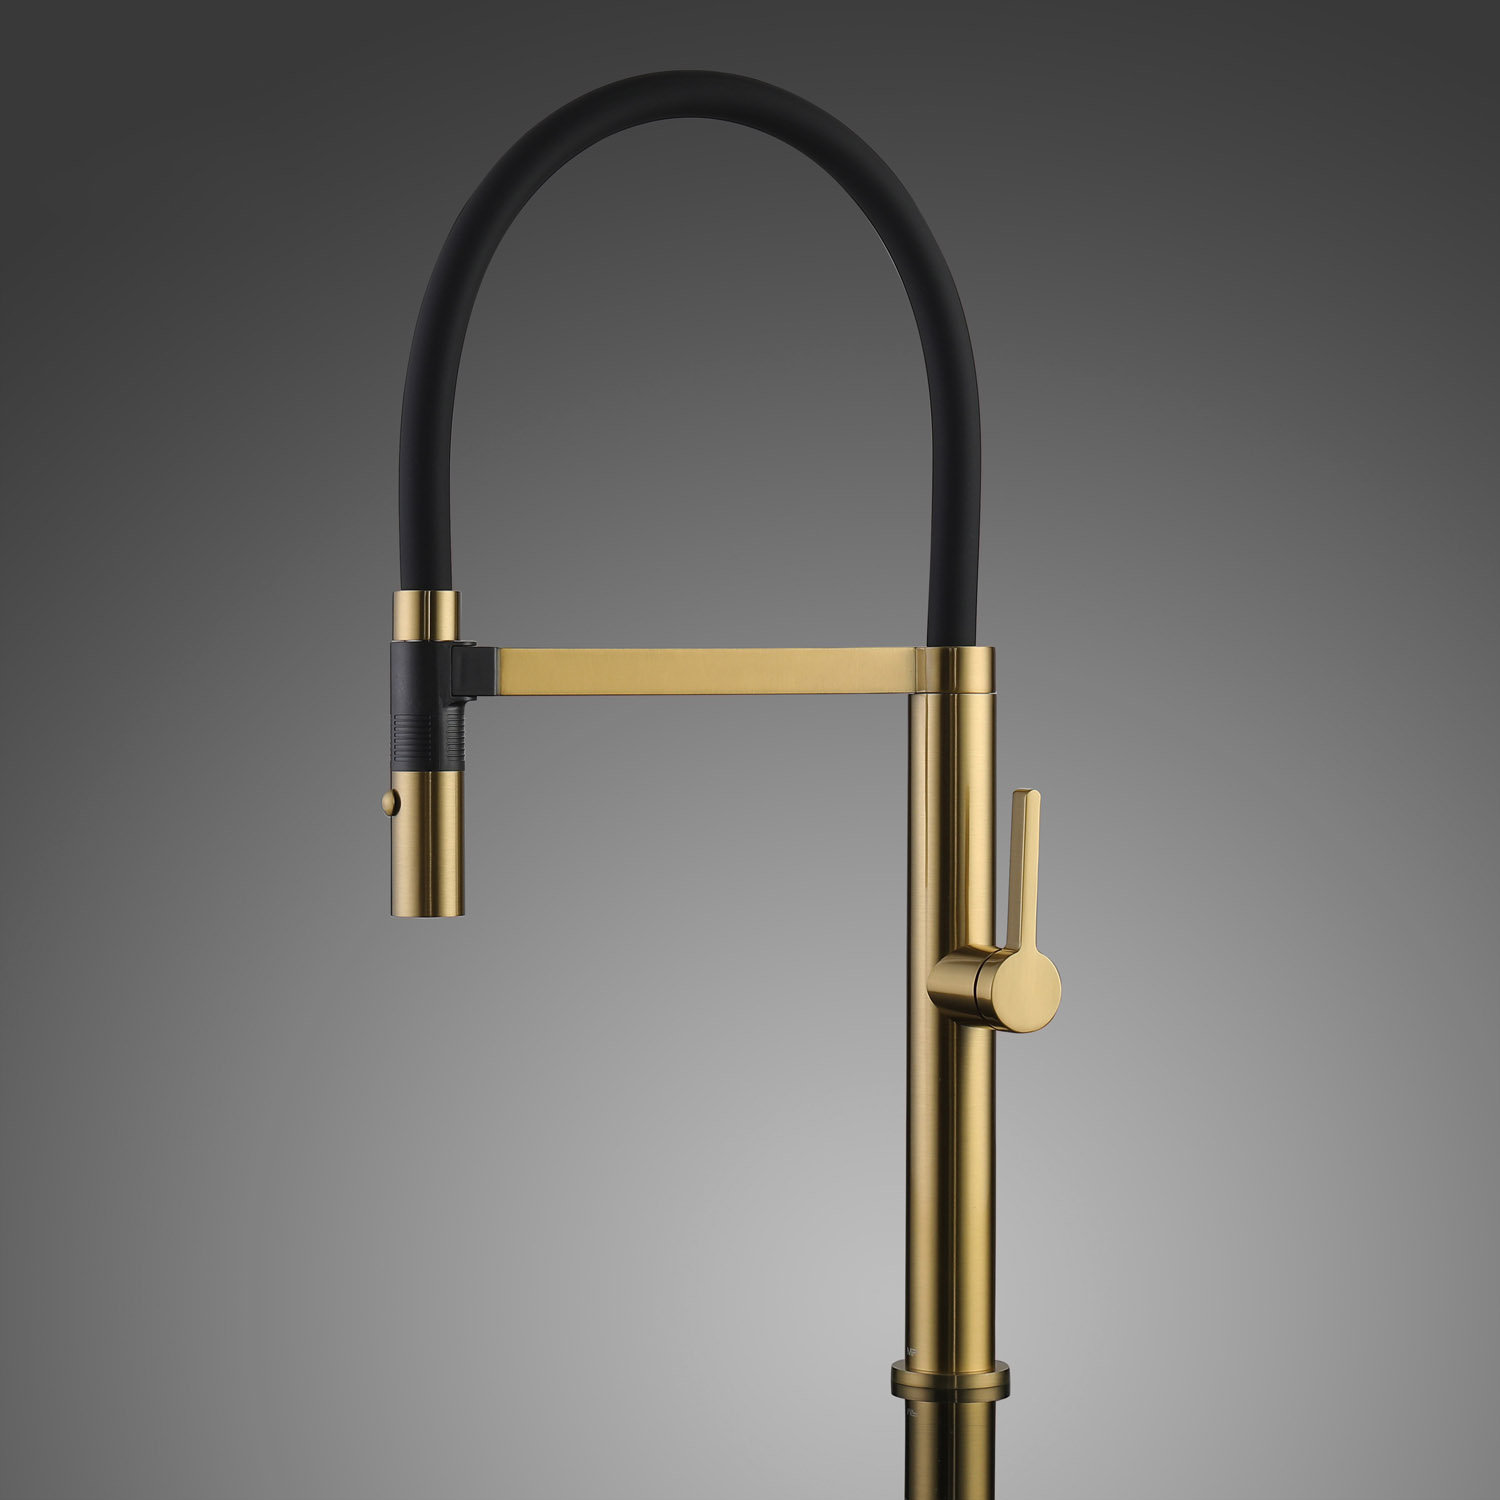 Maestro Bath KIT-ELO-BGL Curva Pull Out Single Handle Kitchen Faucet Finish: Brushed Gold